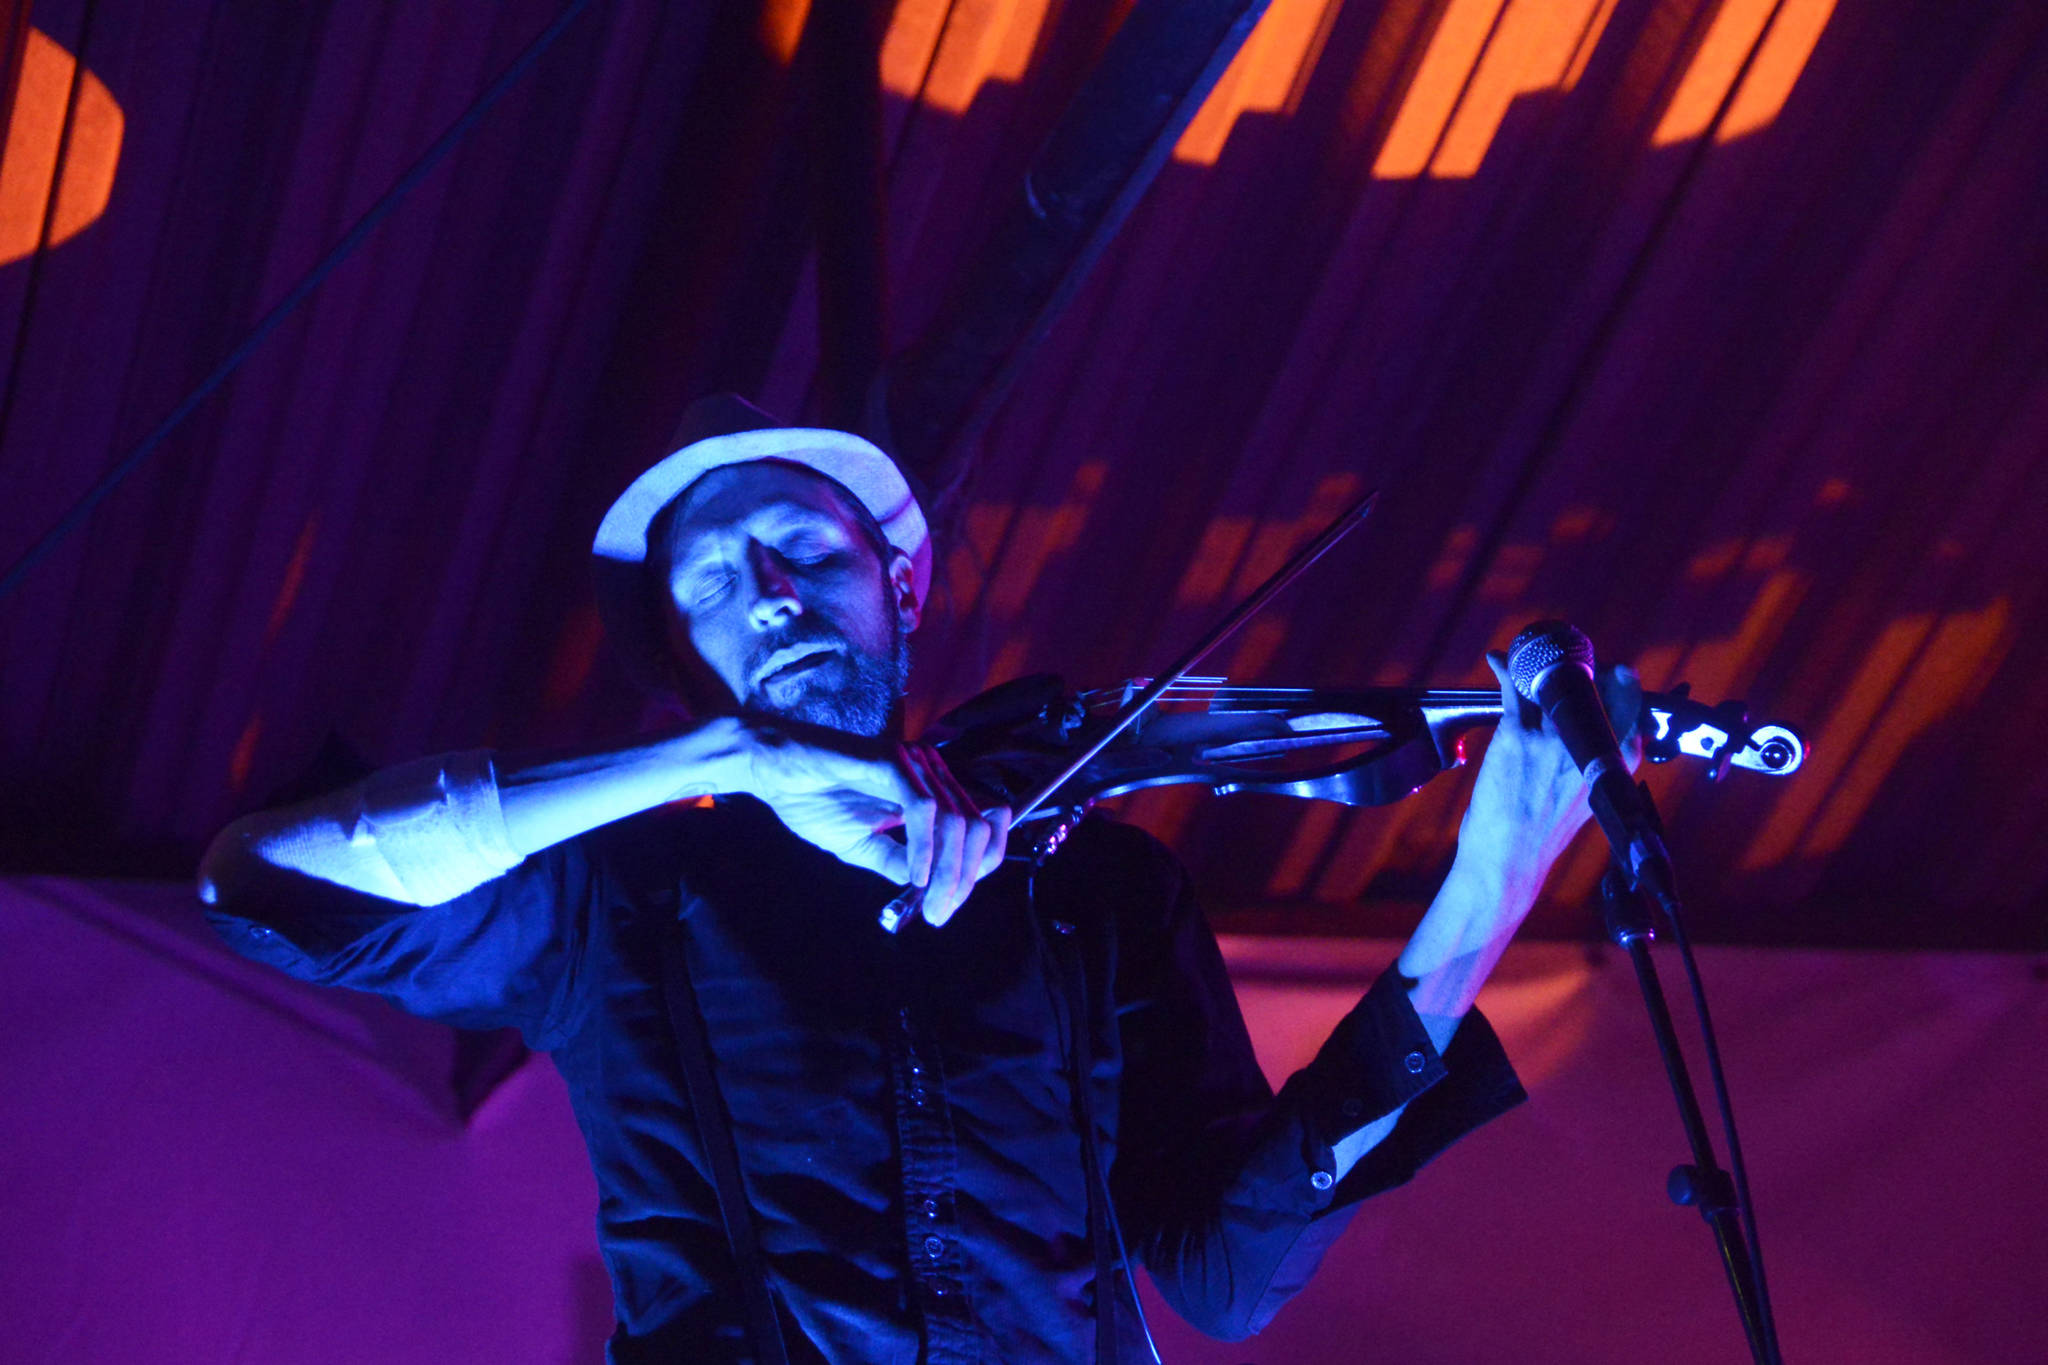 Shane Borth, a violinist and composer for Quixotic, plays during the group’s performance Aug. 7, 2016 at Salmonfest in Ninilchik, Alaska. Quixotic is a cirque nouveau that blends live music with dance, lights and other performance art. Photo by Megan Pacer/Peninsula Clarion